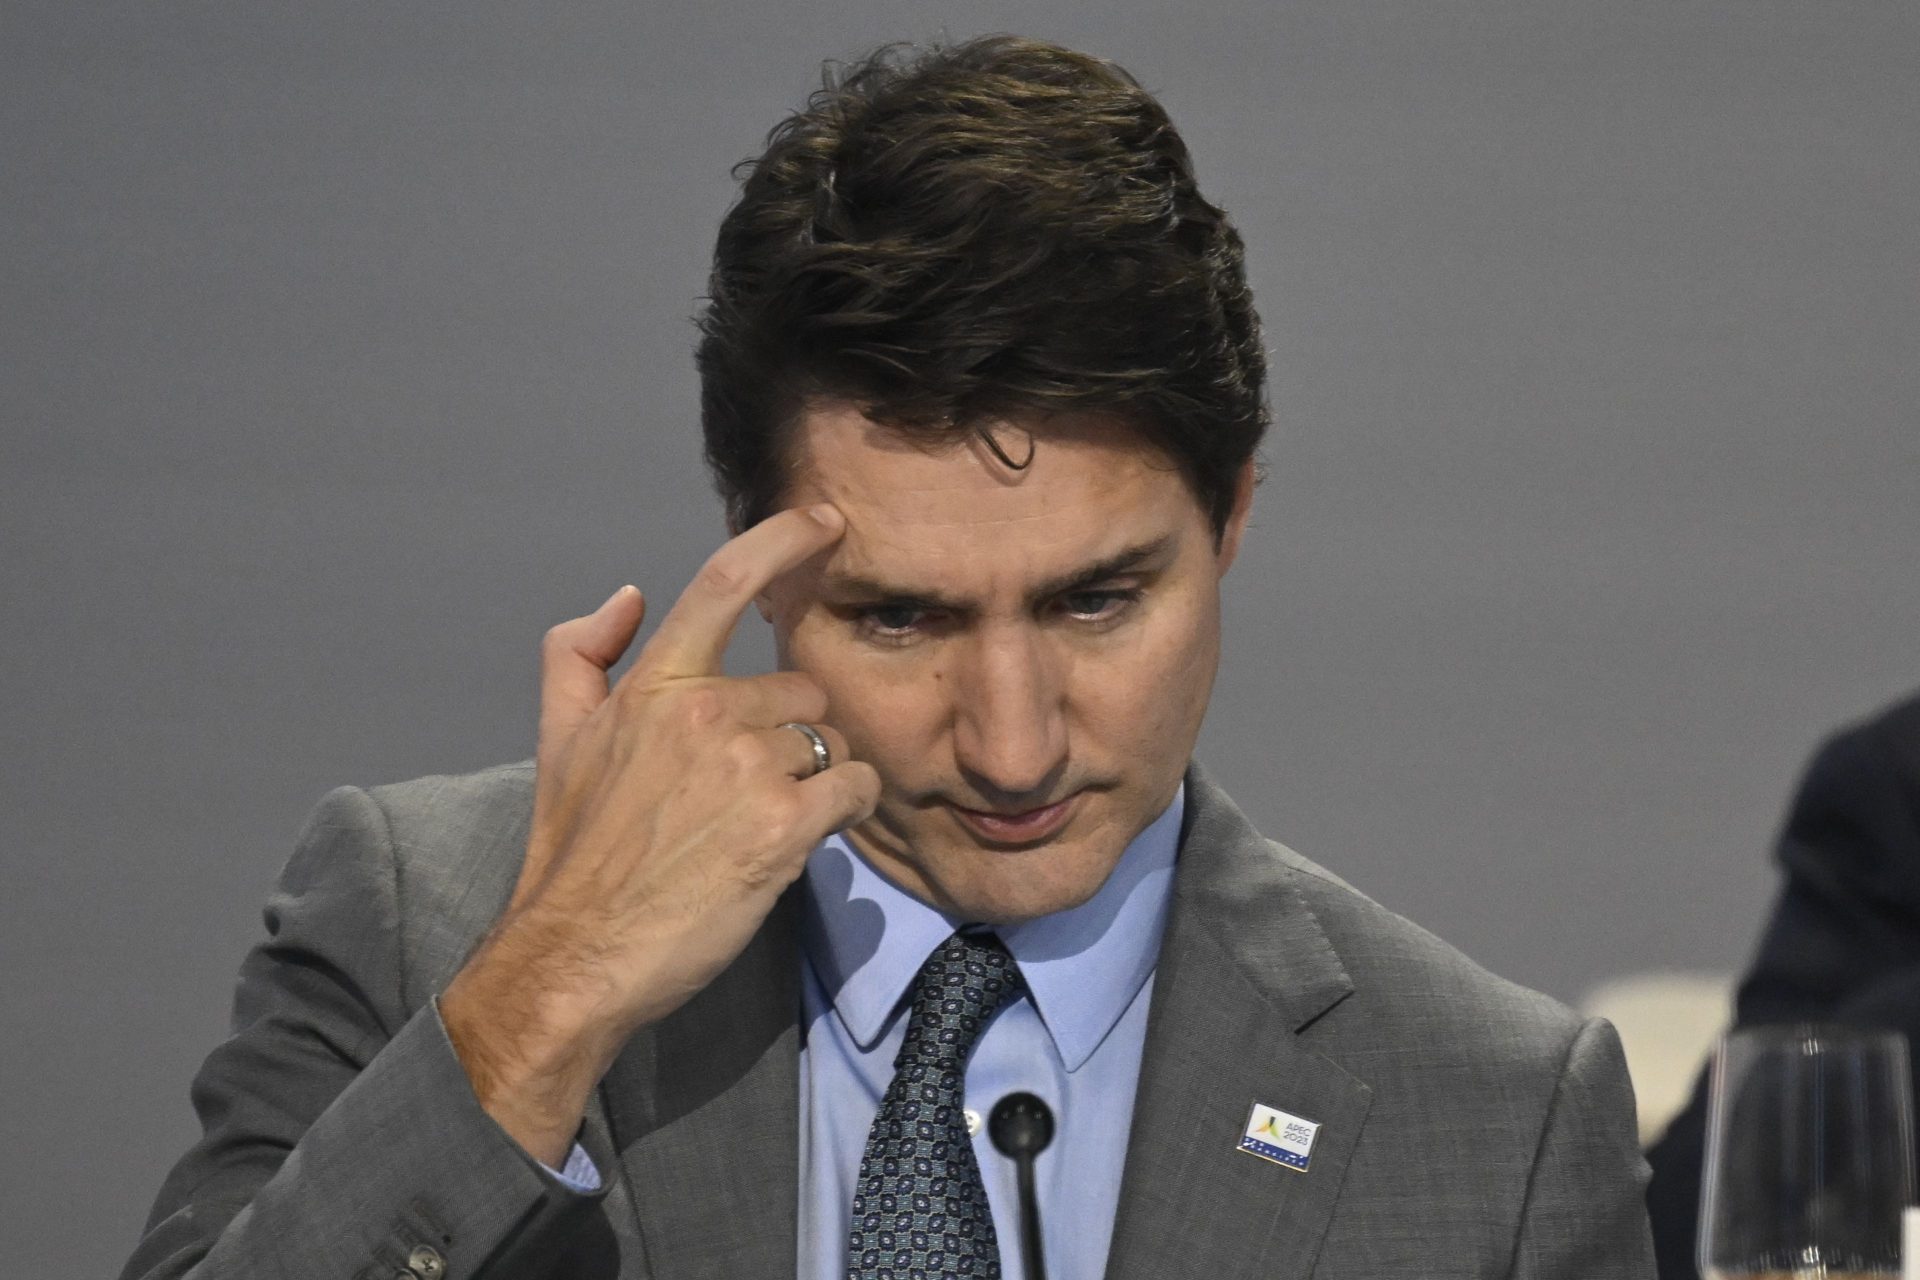 Other pollsters think Trudeau is in trouble